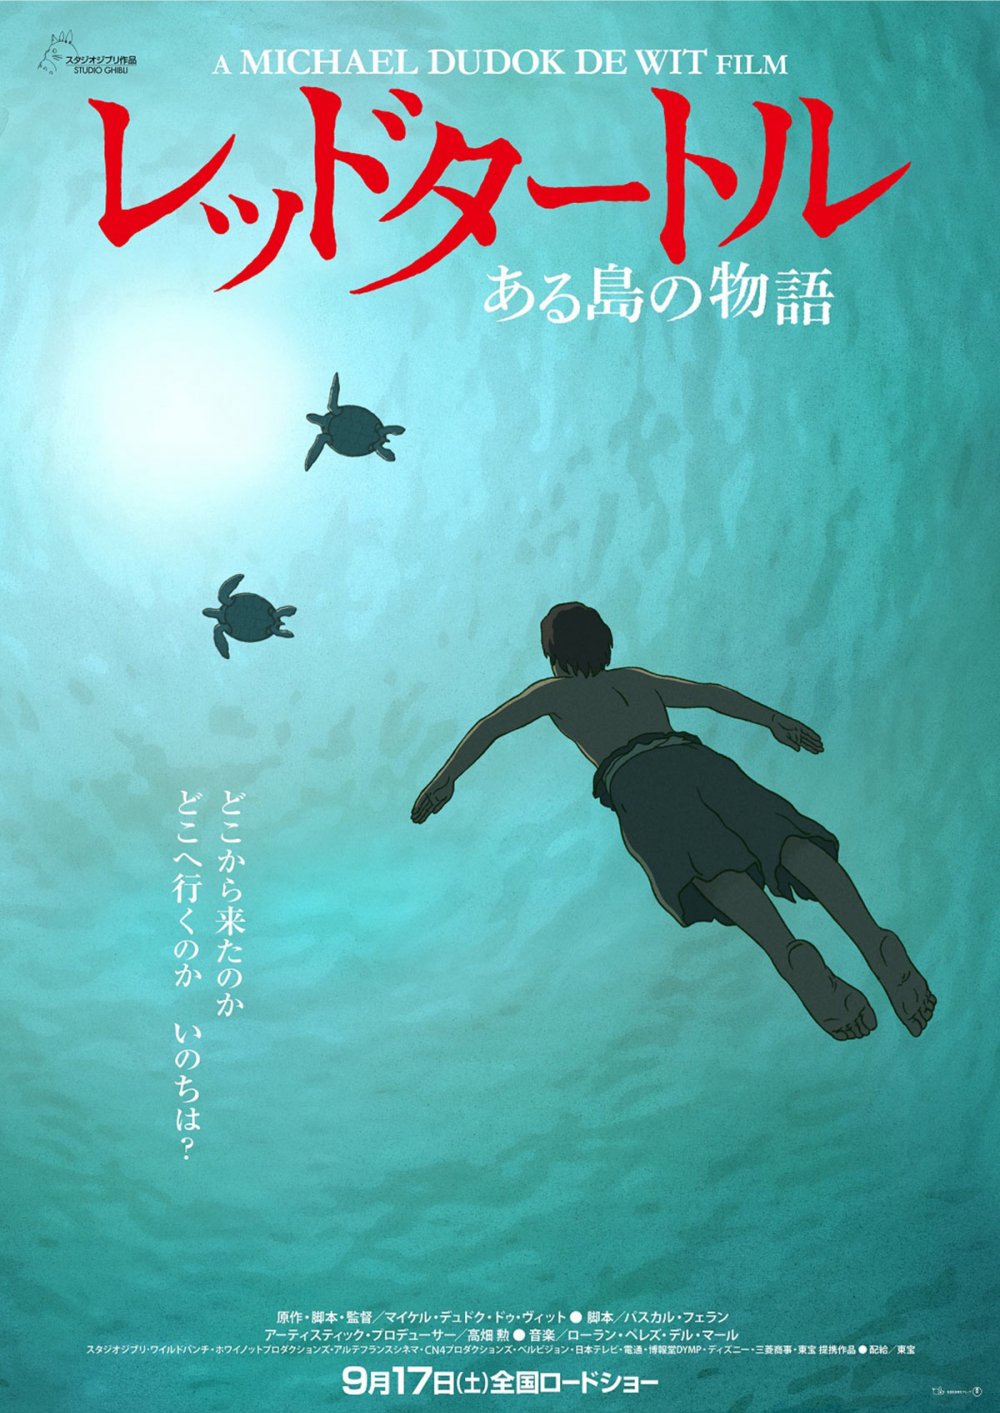 A Japanese festival poster for Michael Dudok de Wit’s The Red Turtle (2016)